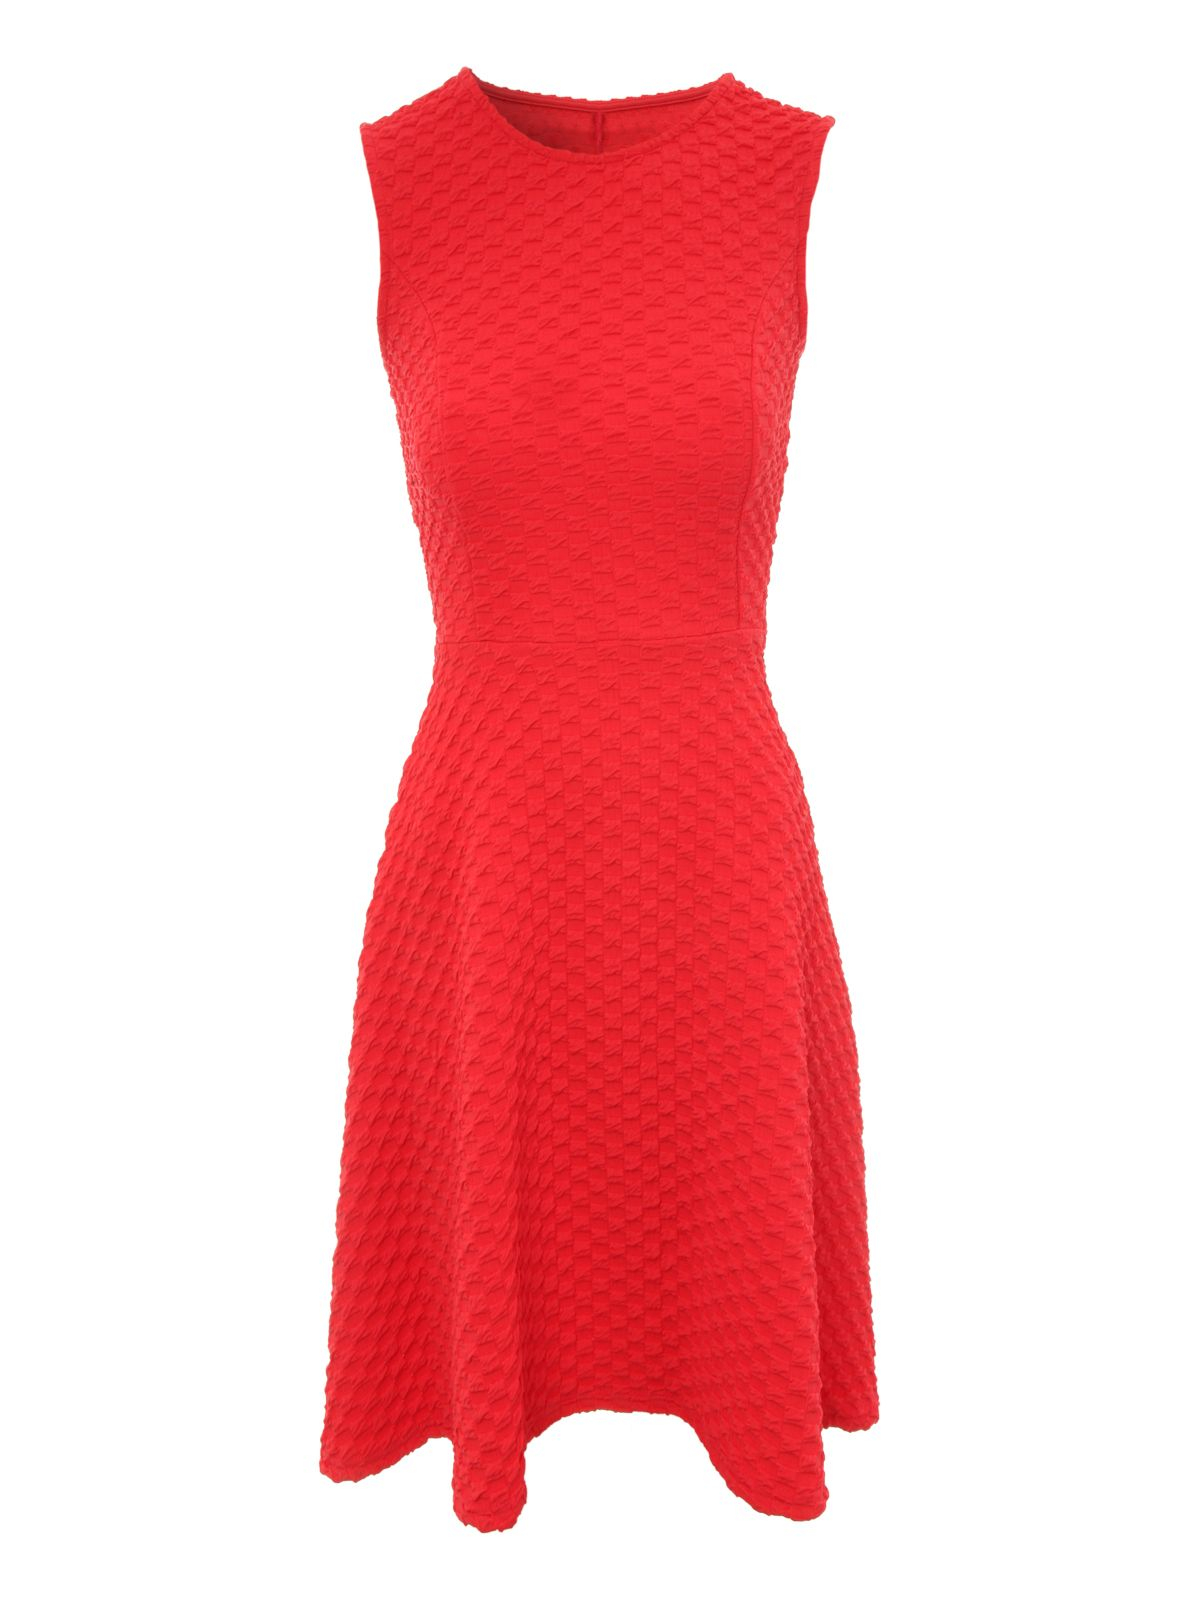 Jane norman Textured Skater Dress in Red | Lyst